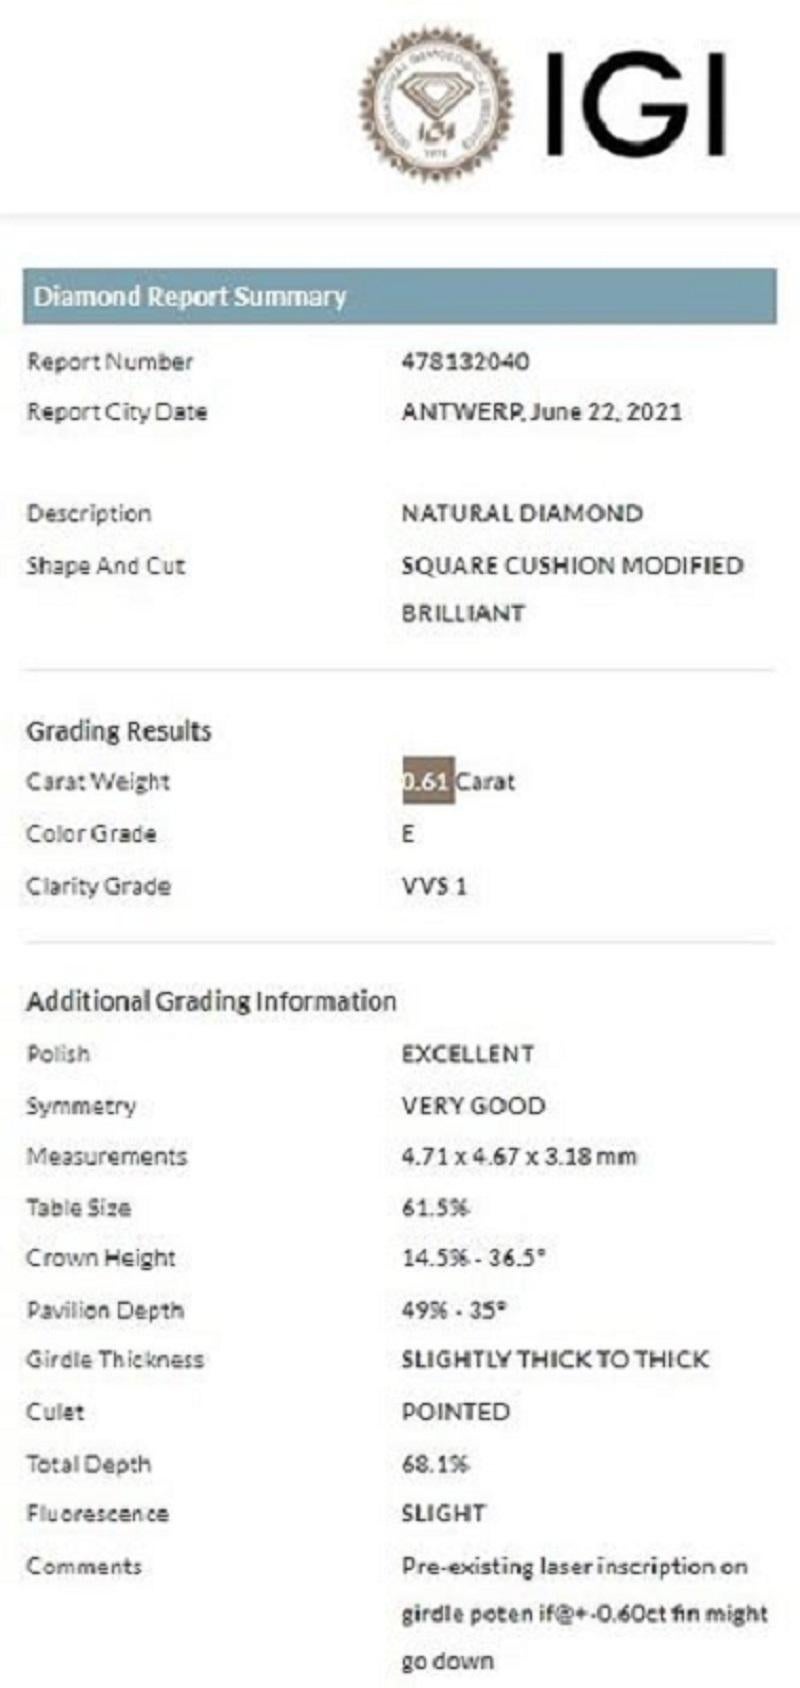 Natural and Brilliant Cushion cut diamond with a 0.61 carat E VVS1 grading By Igi Lab the Diamond comes with IGI Certificate sealed in a security Blister with security laser inscription number.

Ideal Cut

Sku: P-253